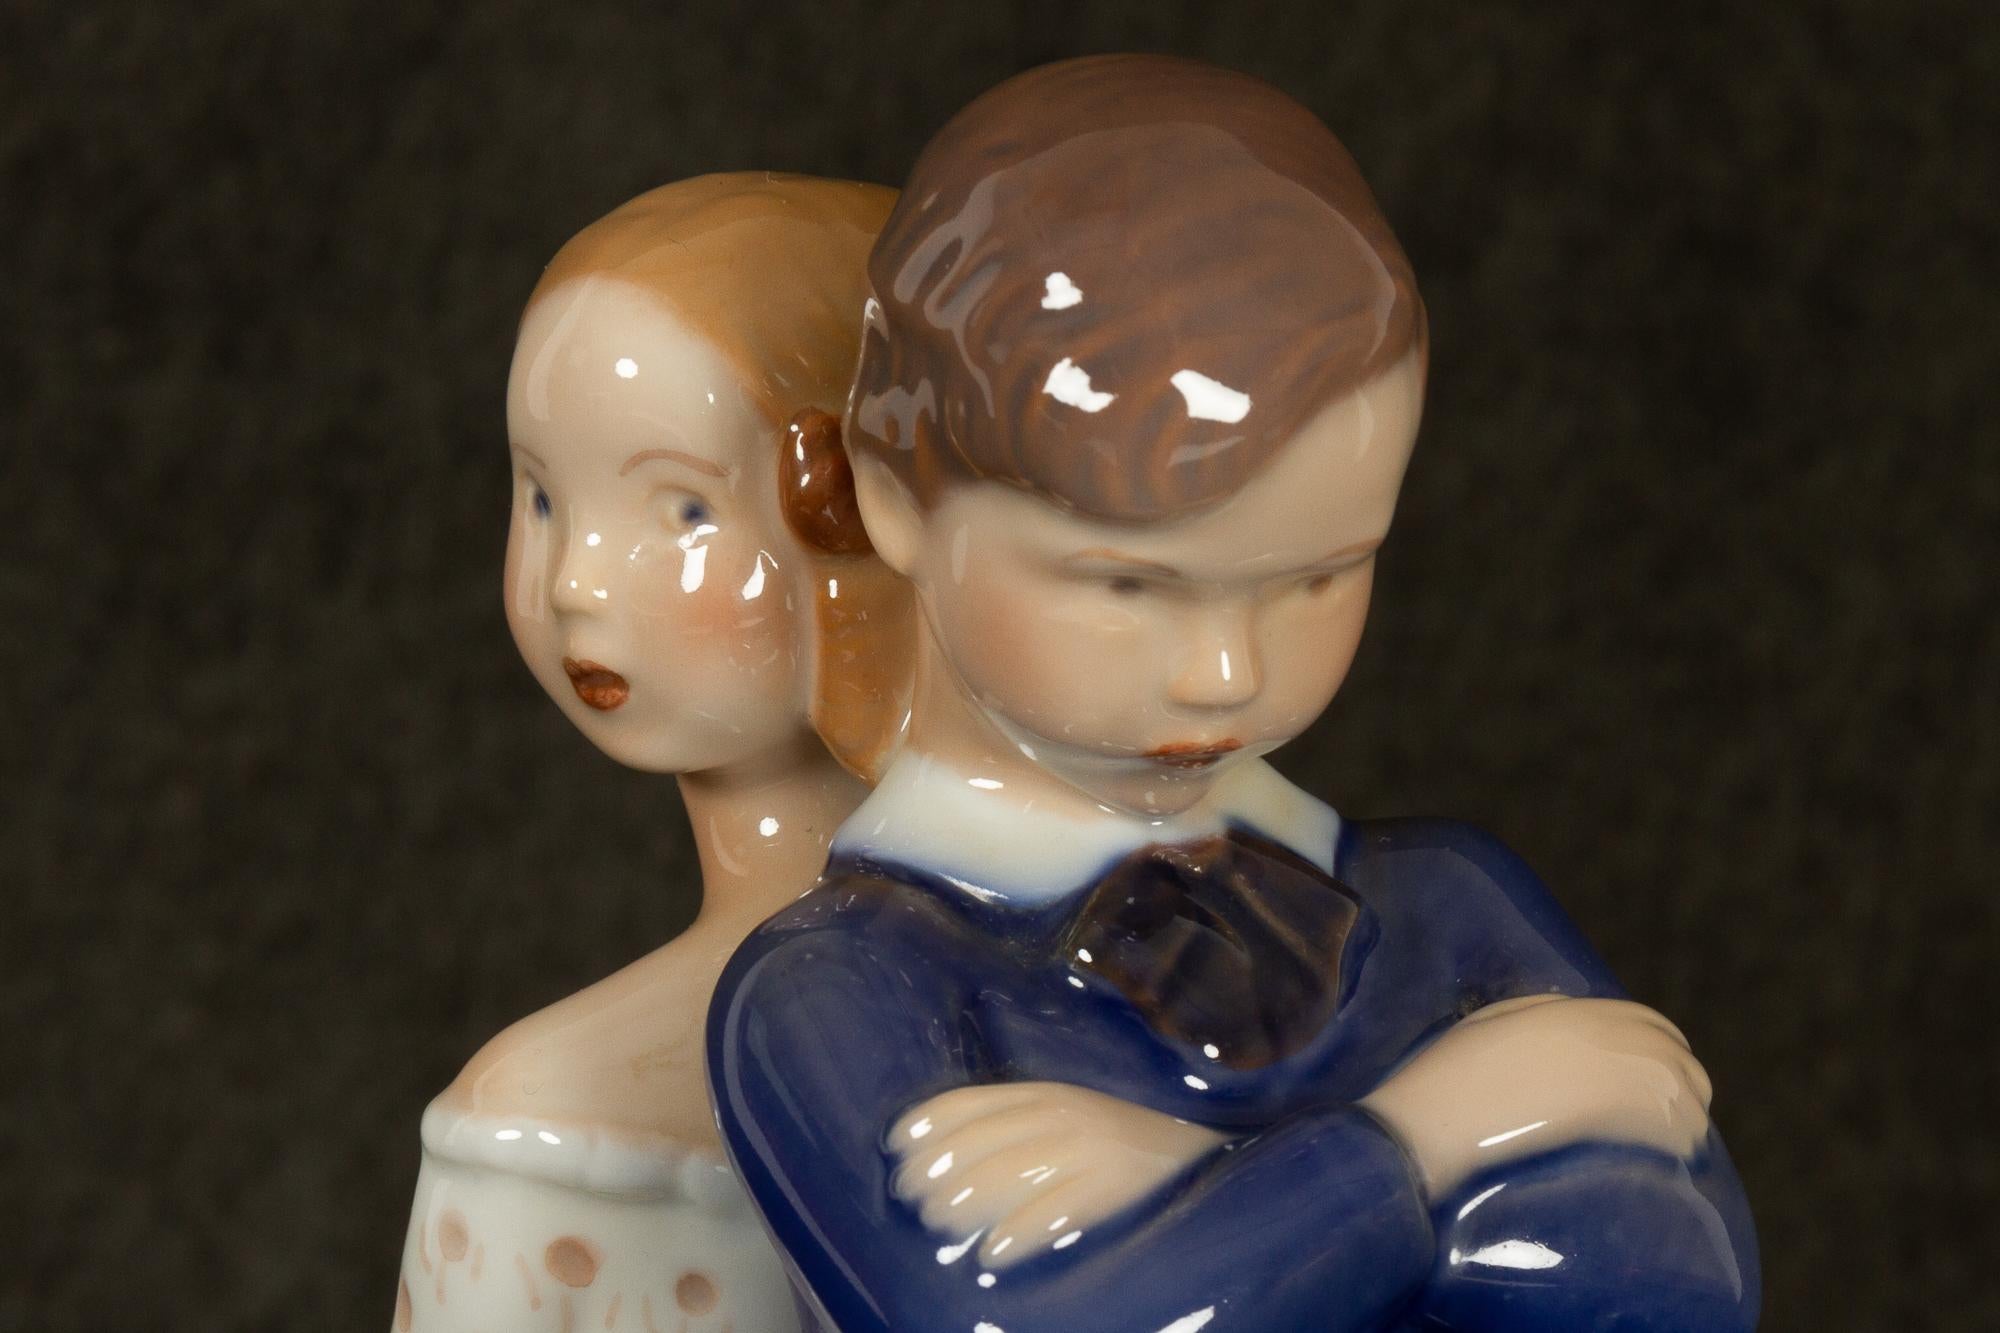 Vintage Danish Porcelain Figurine by Claire Weiss for Bing & Grøndahl, 1970s For Sale 1